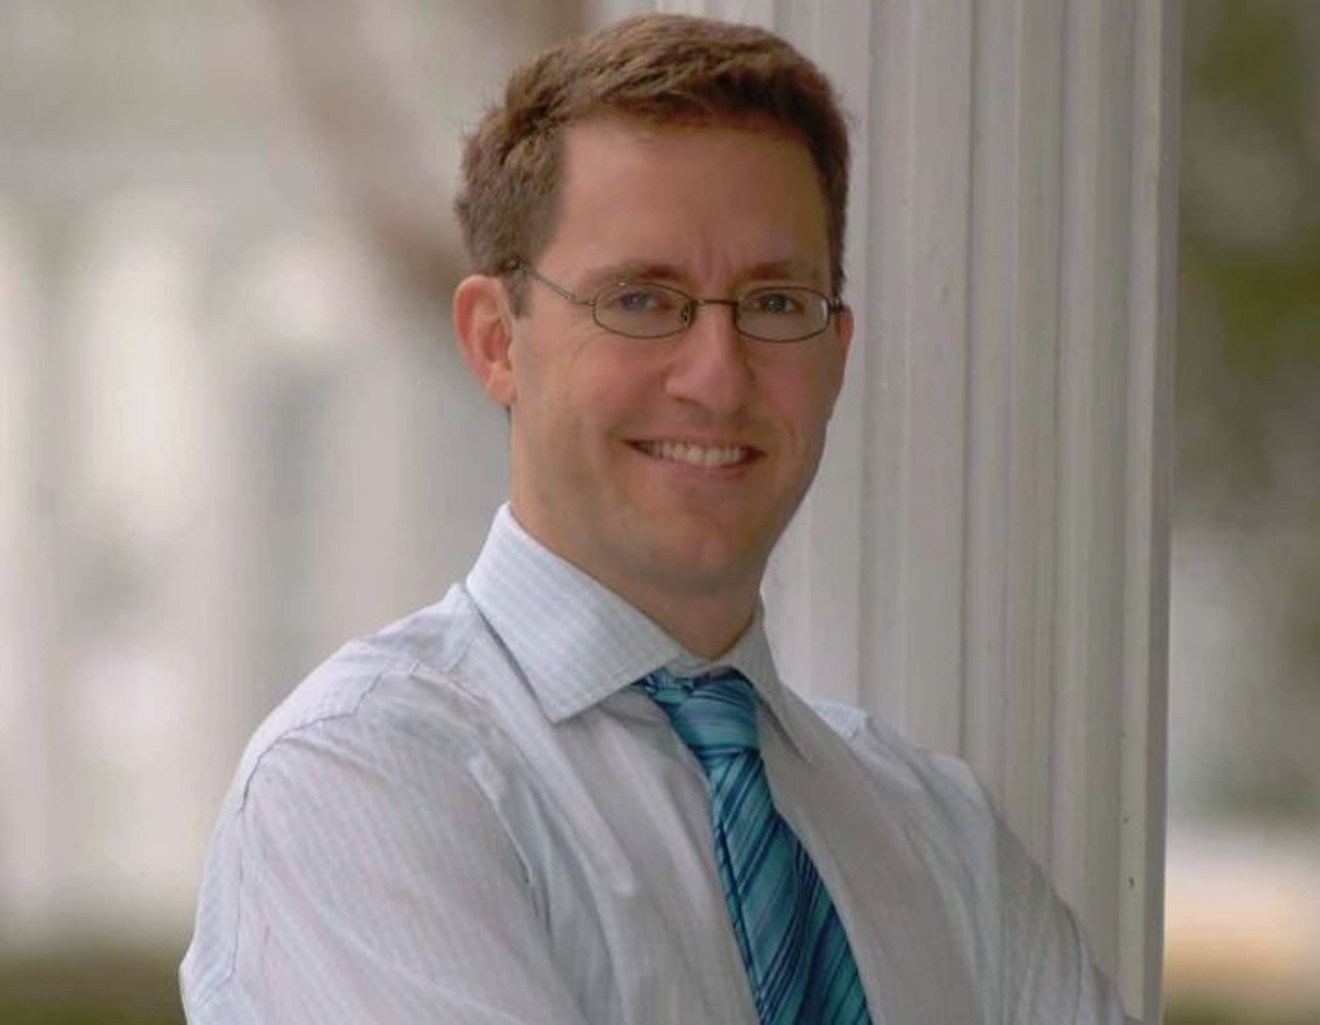 Dan Markel was a prominent law professor at Florida State University.